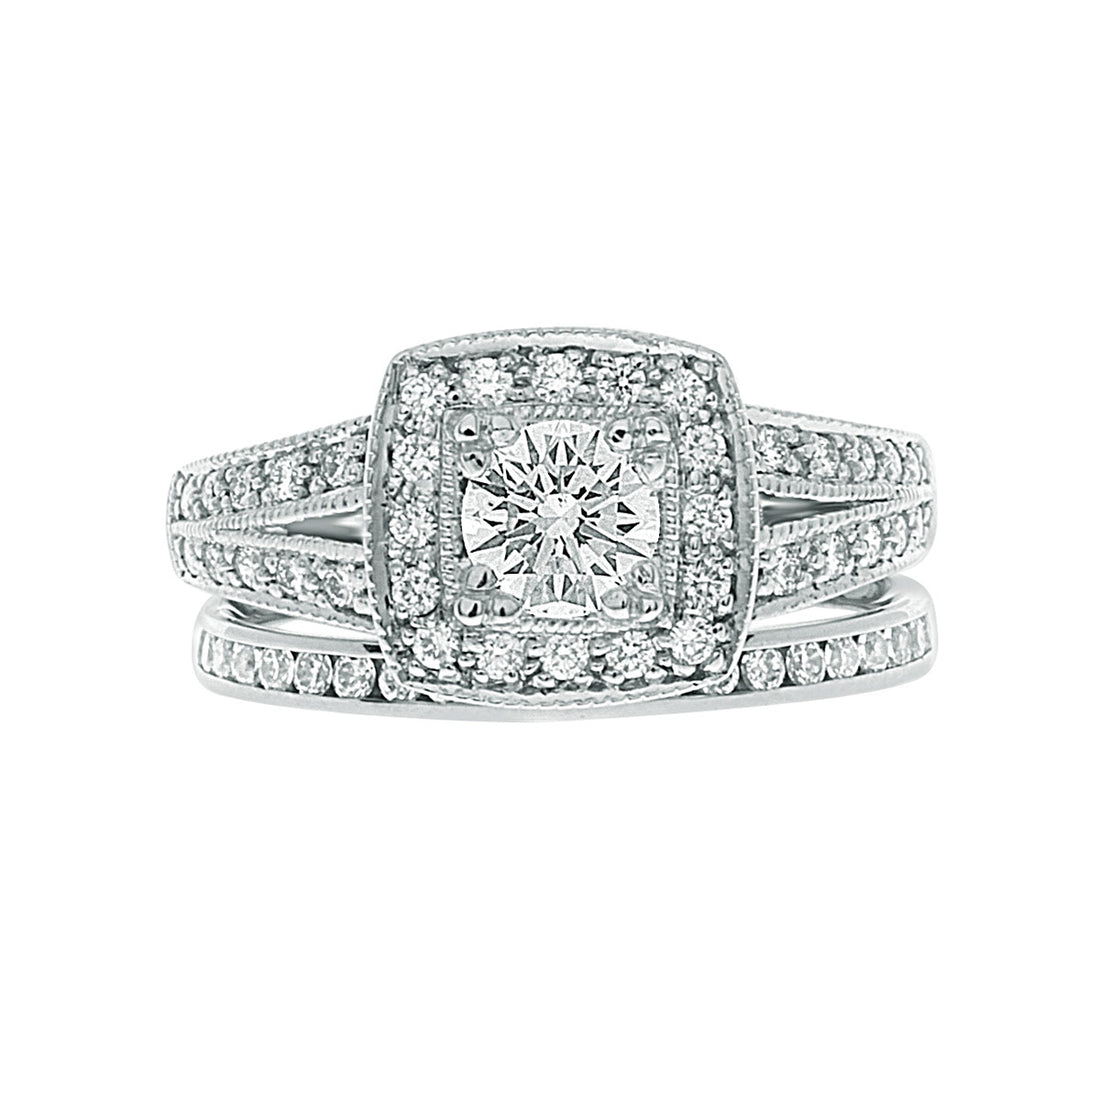 Halo Engagement Ring with Milgrain in white gold pictured with a matching diamond wedding ring